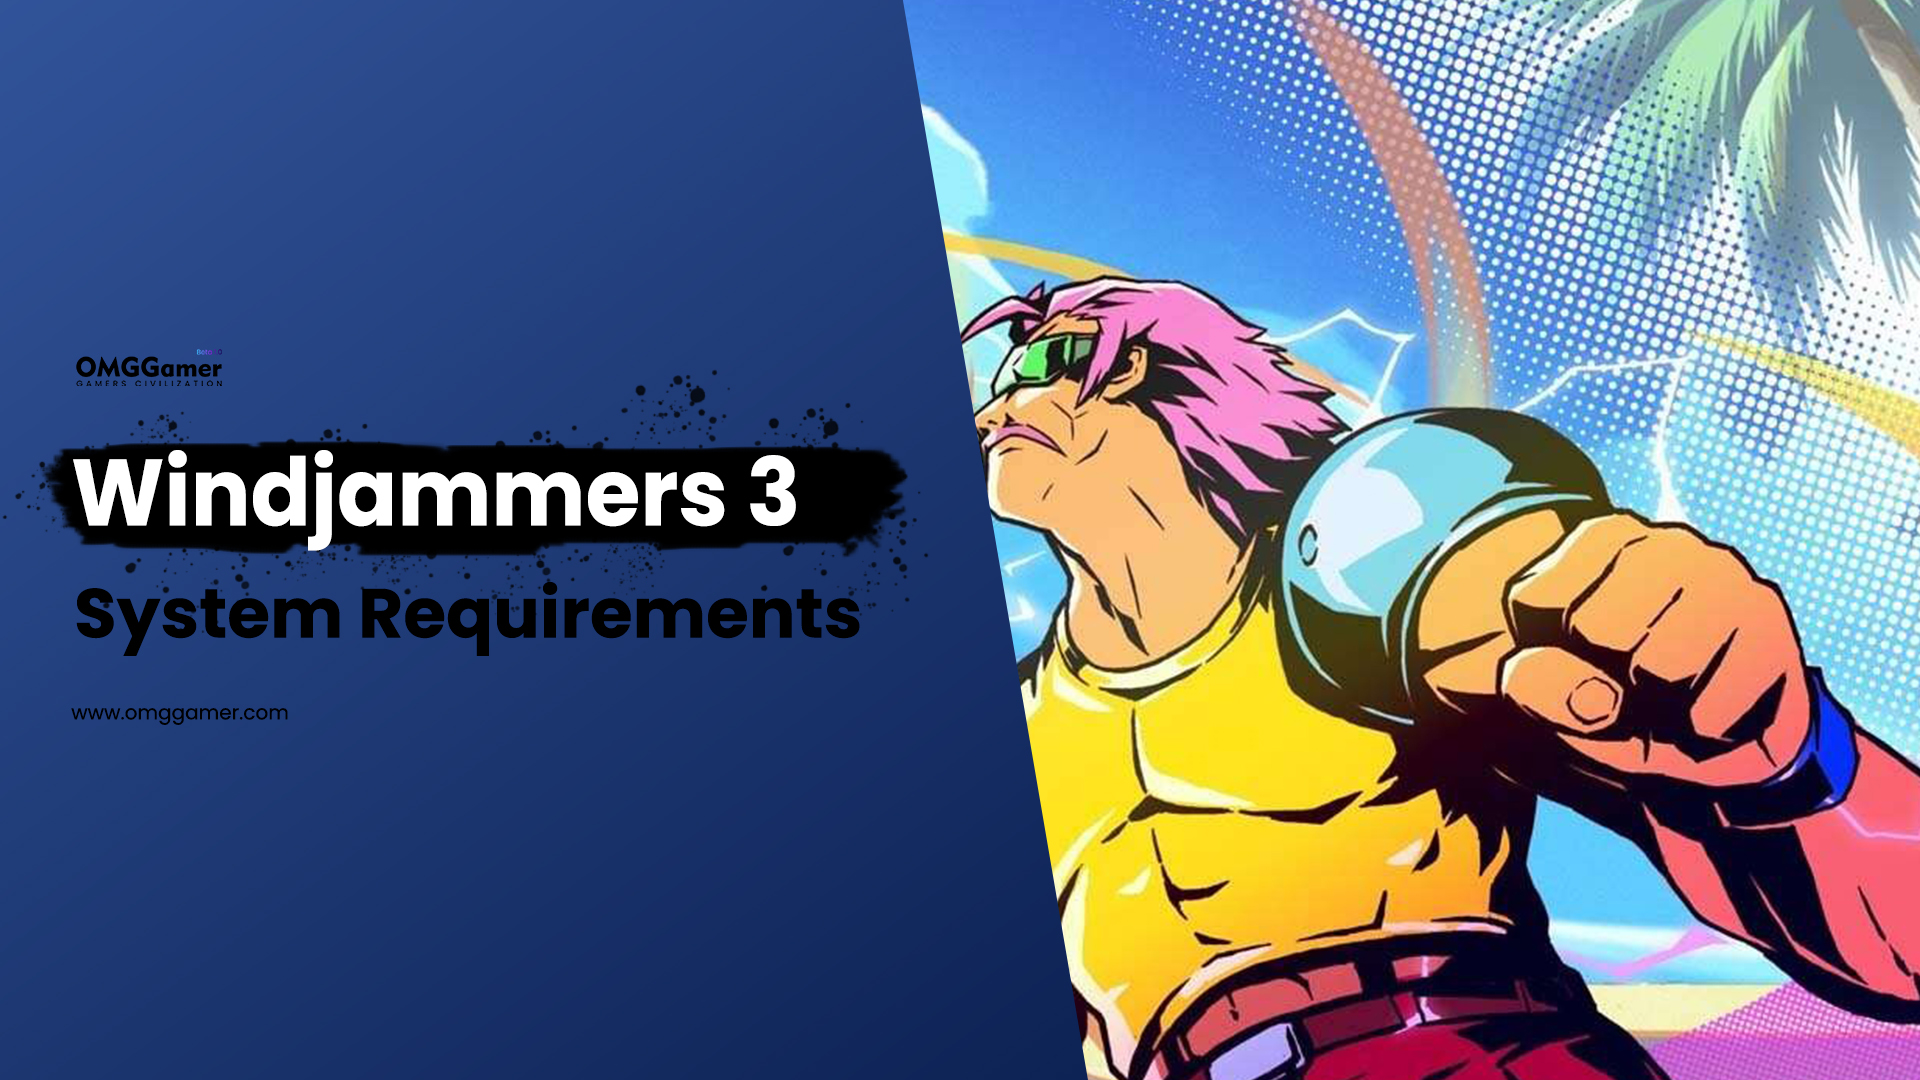 Windjammers 3 System Requirements